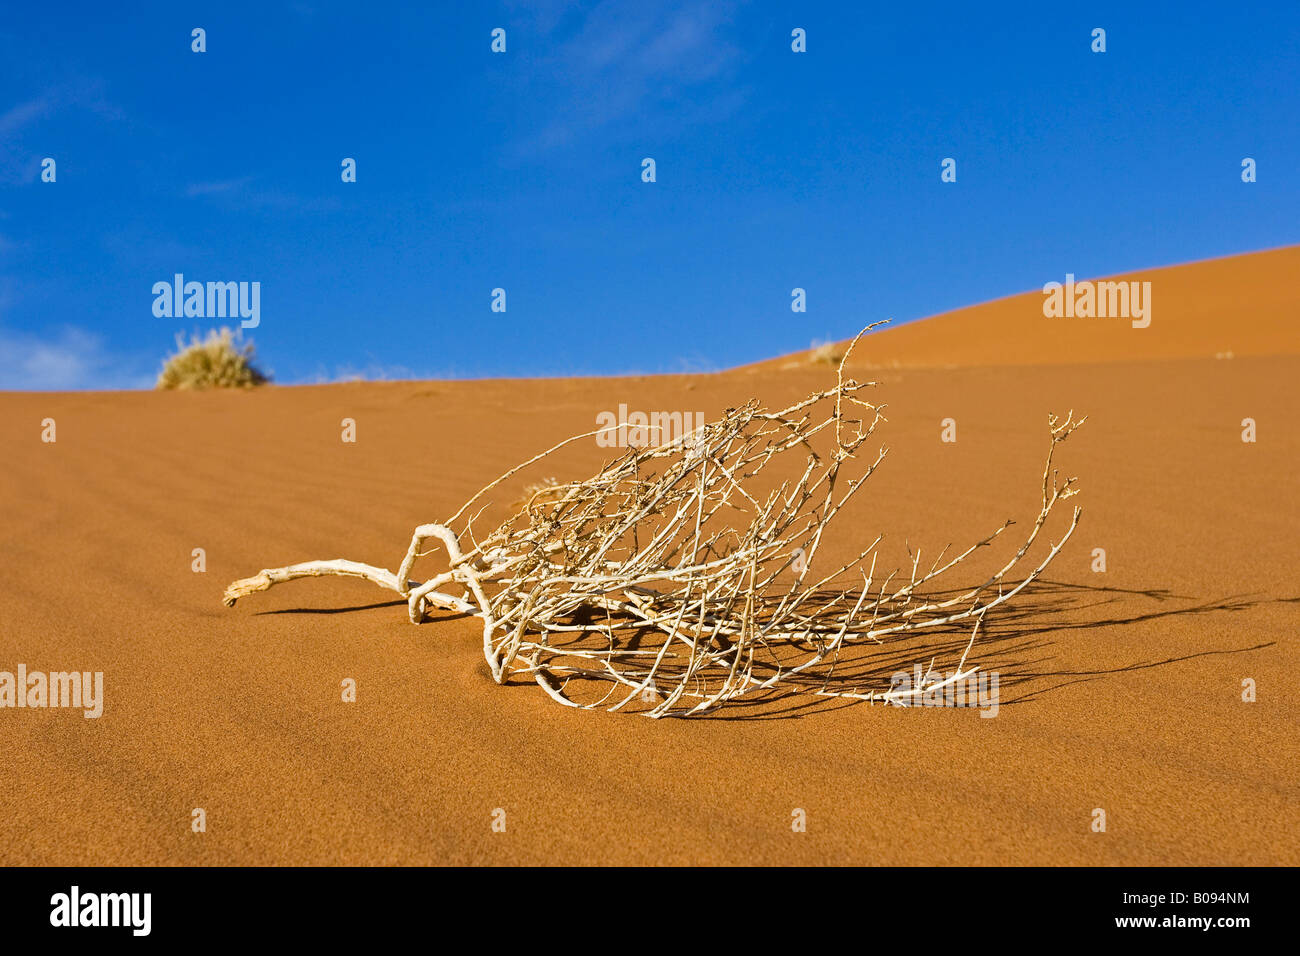 Dried up bush twigs on a sand dune in Deadvlei, Namib Desert, Namibia, Africa Stock Photo